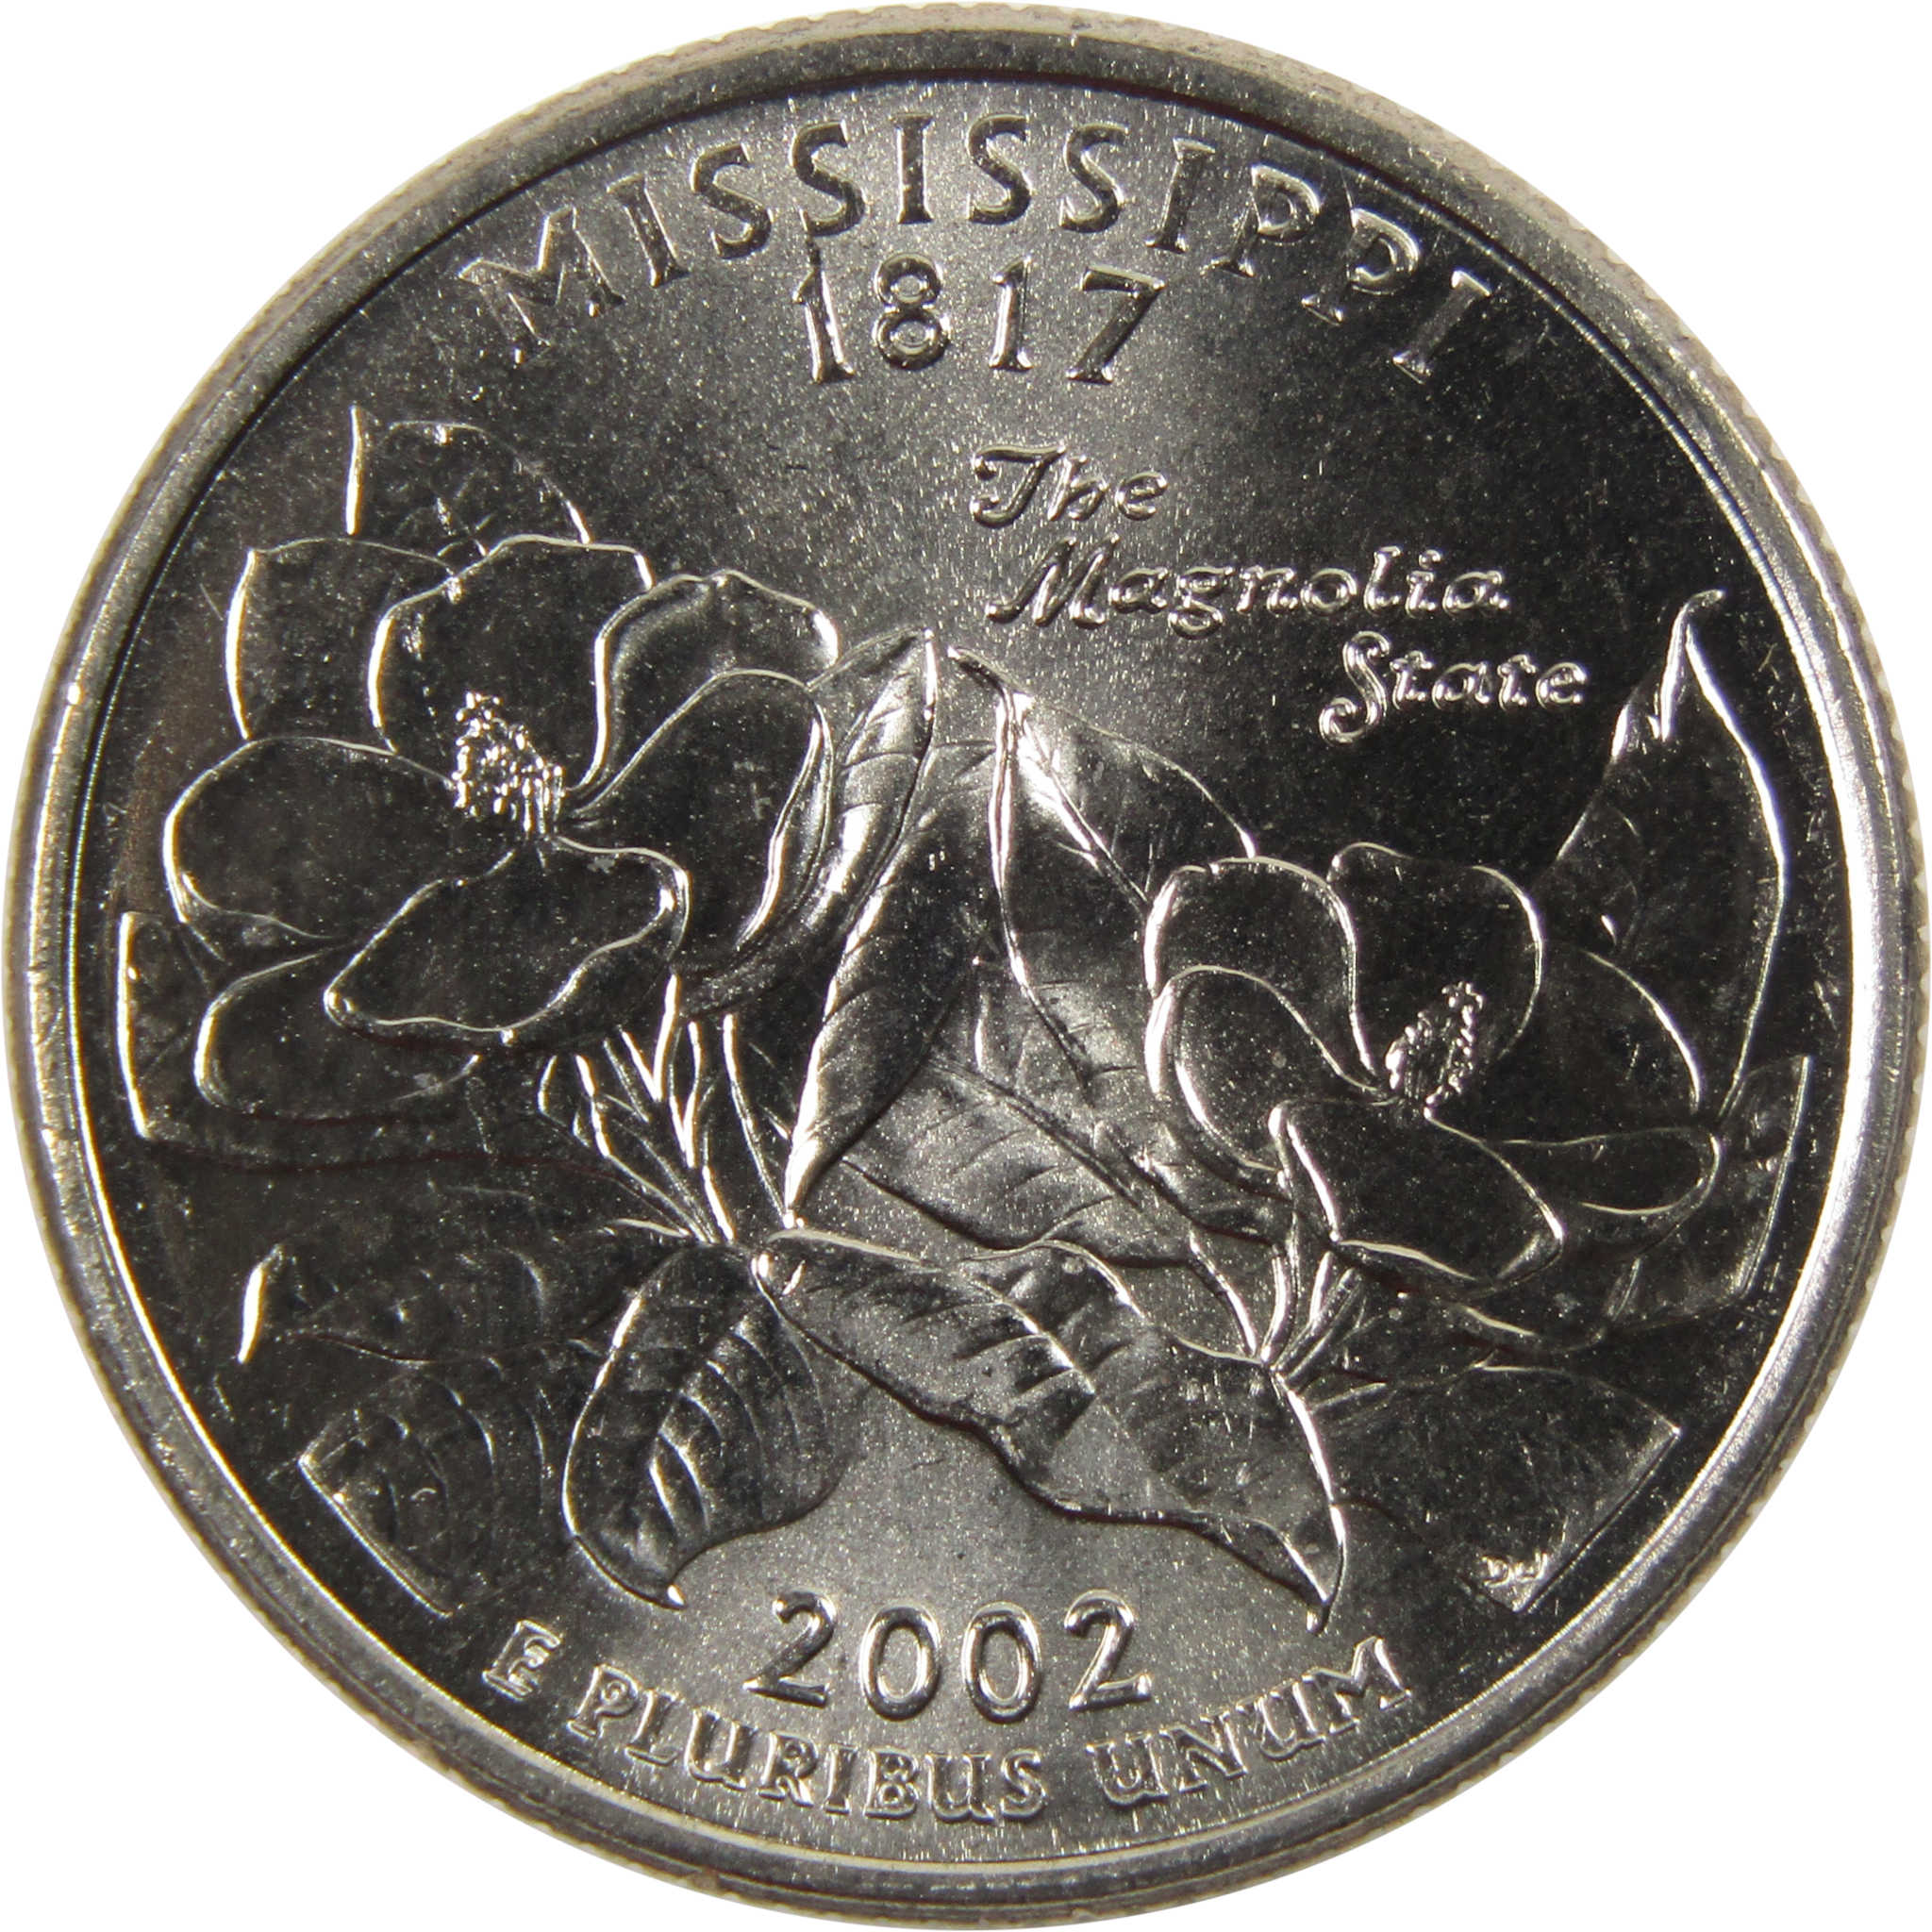 2002 D Mississippi State Quarter BU Uncirculated Clad 25c Coin